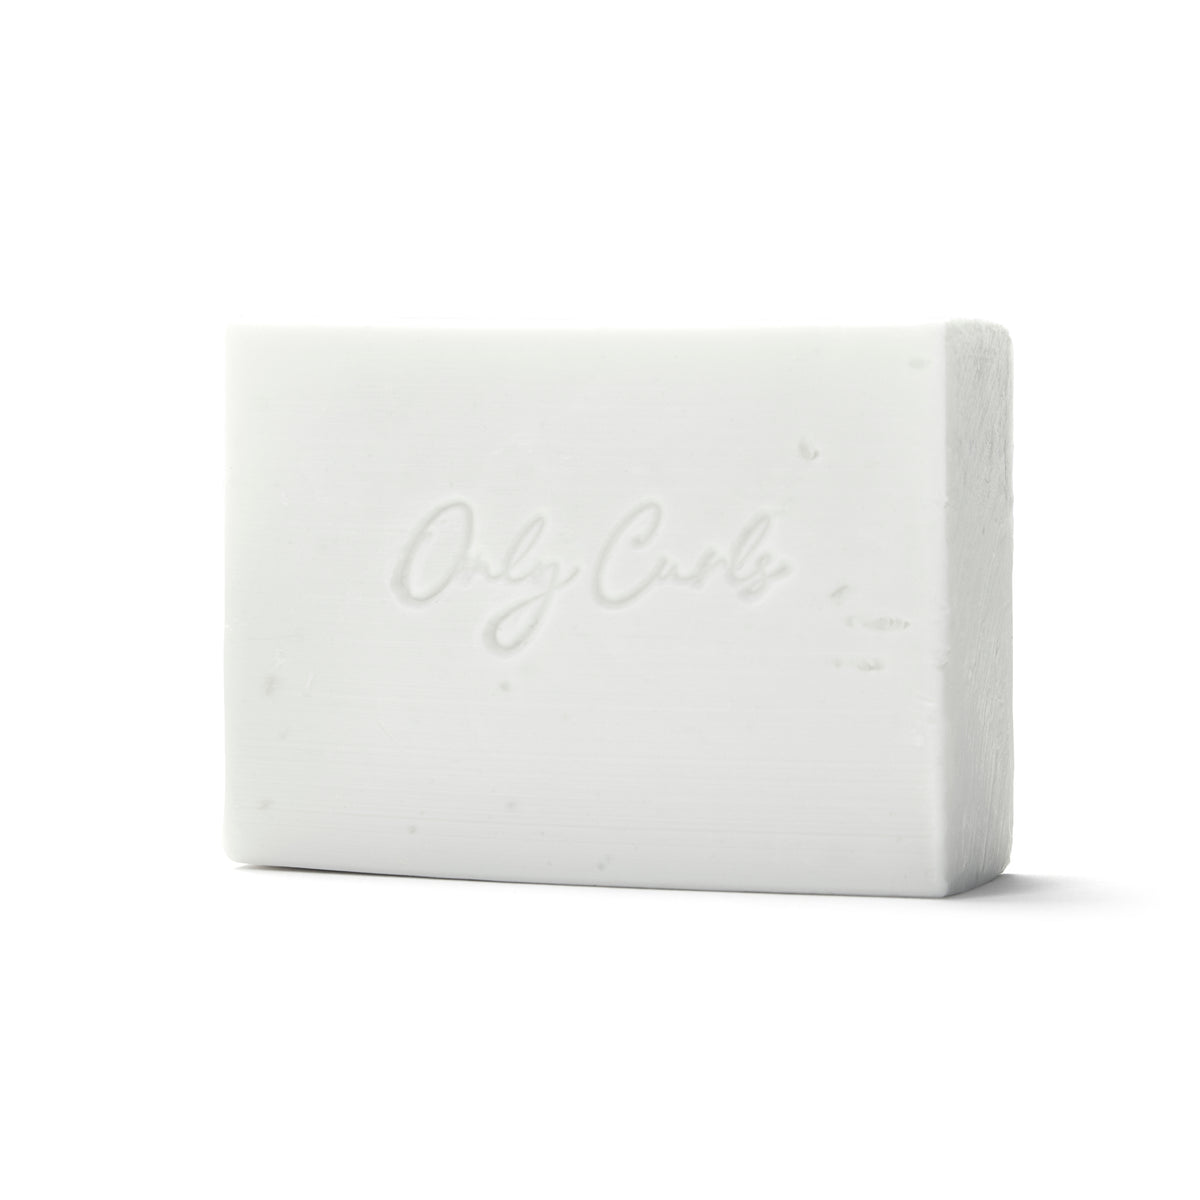 Only Curls Curl Cleansing Shampoo Bar 